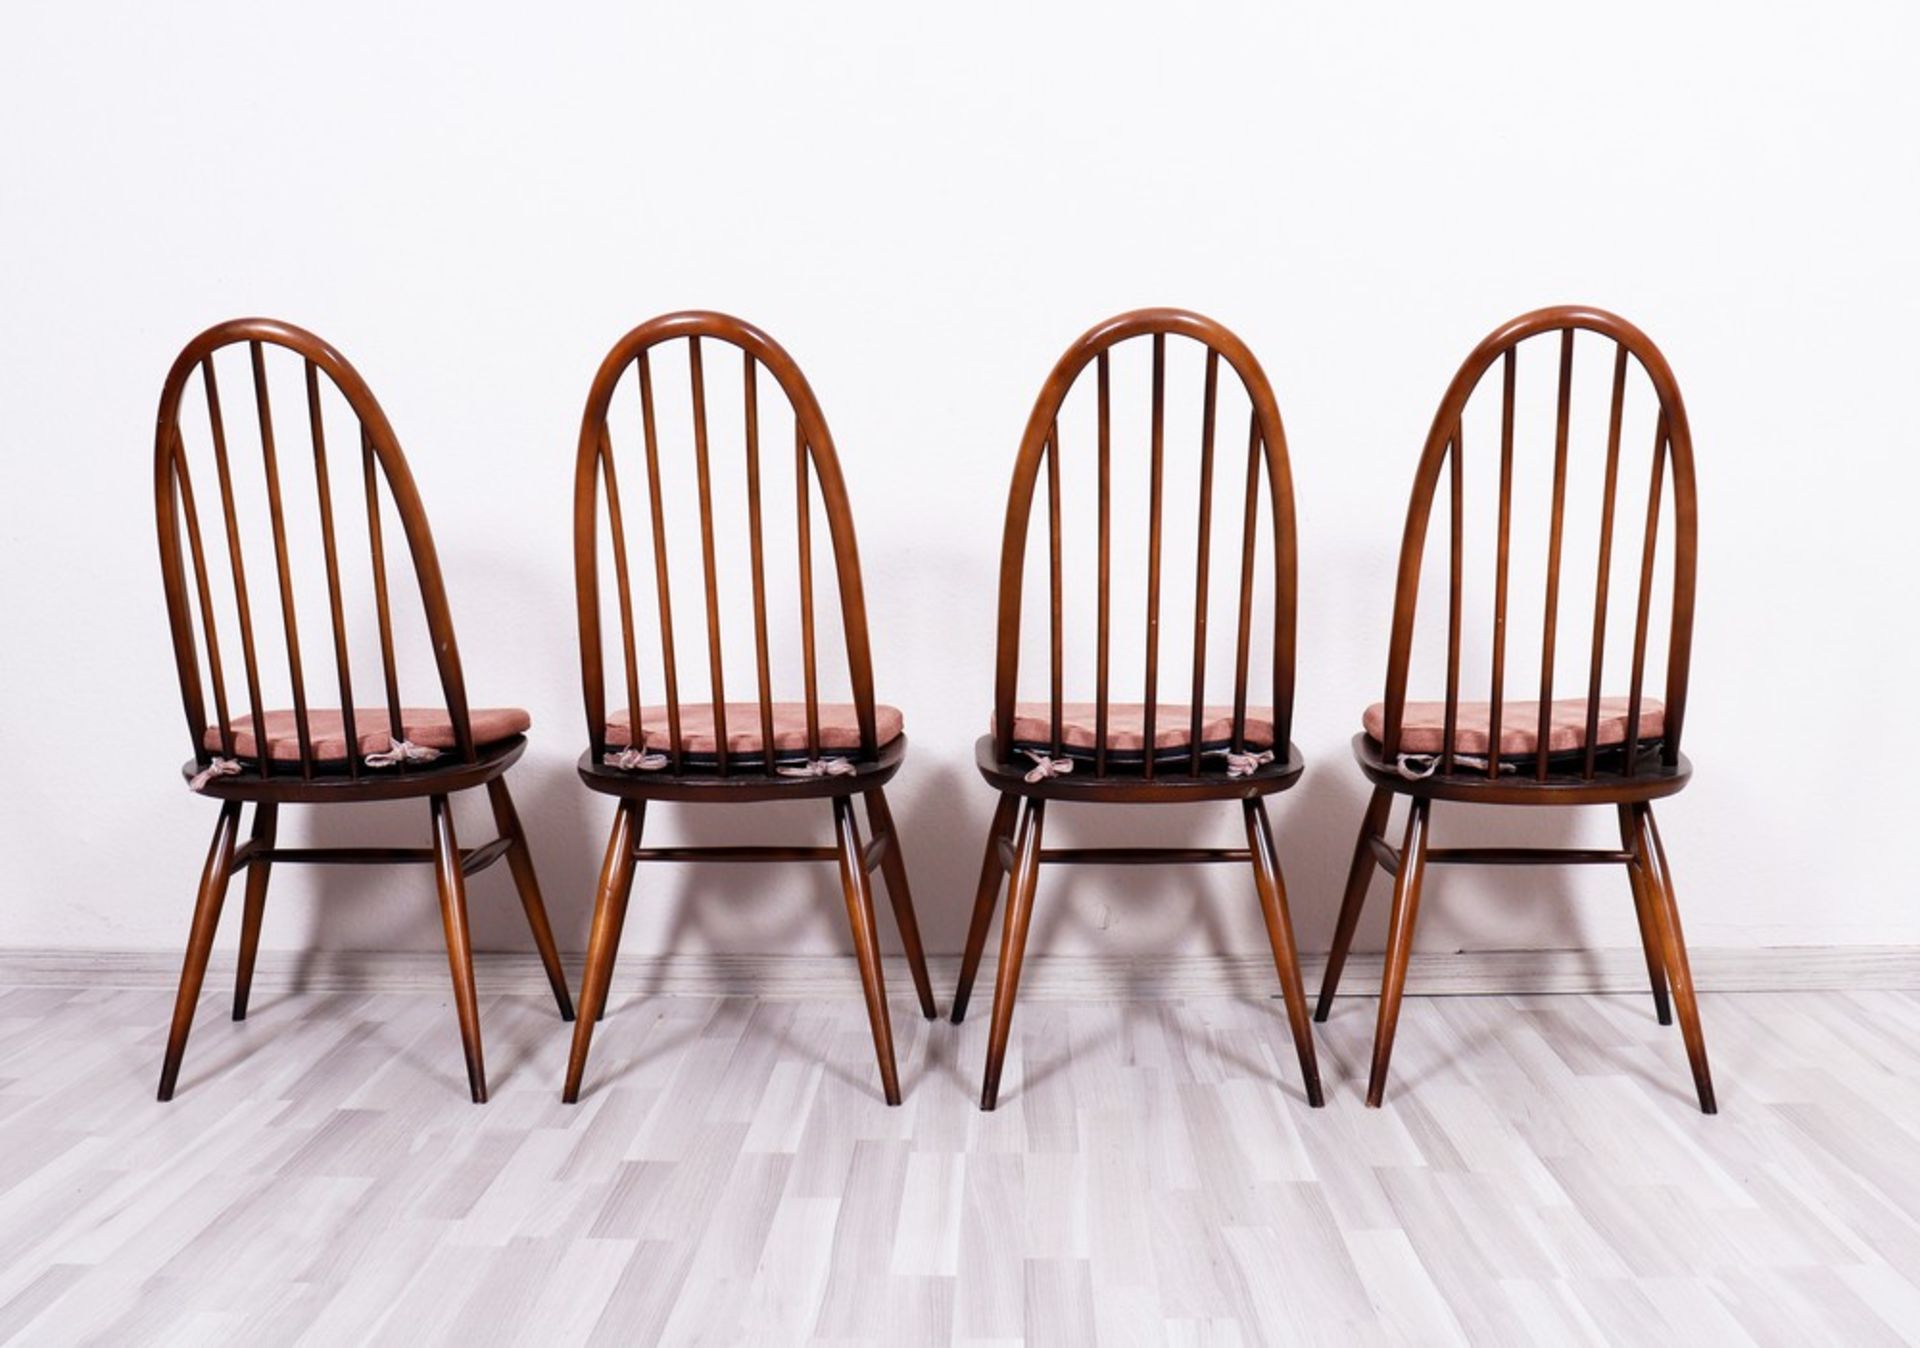 4 dining chairs, design Lucian Ercolani for Ercol, England, c. 1960 - Image 3 of 4